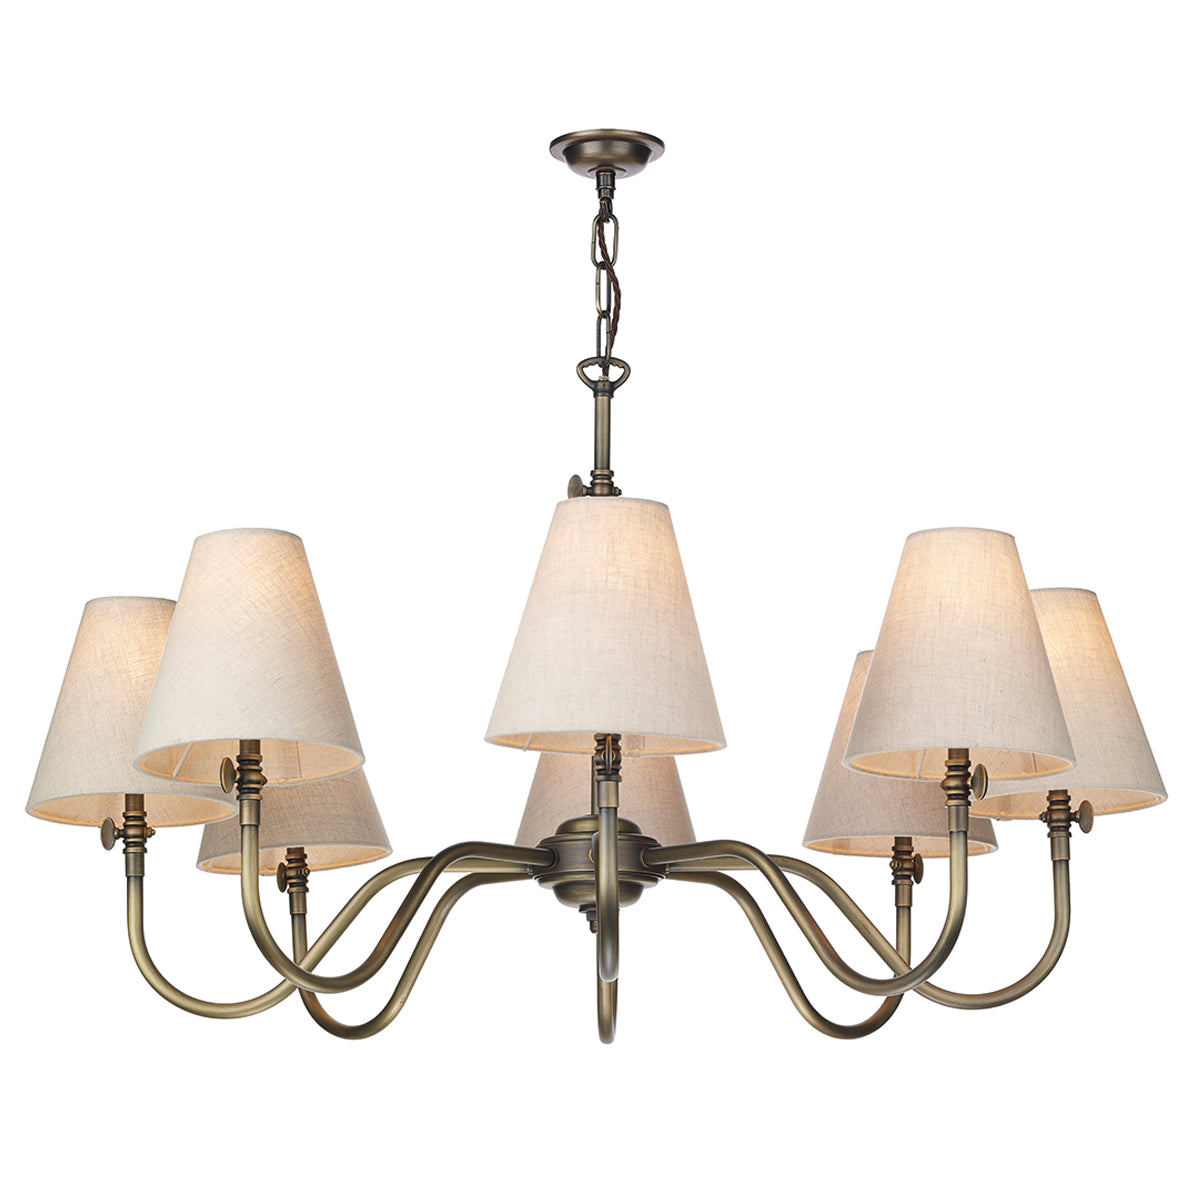 David Hunt Lighting Hicks 8 light finished in antique brass shown with ivory linen shades